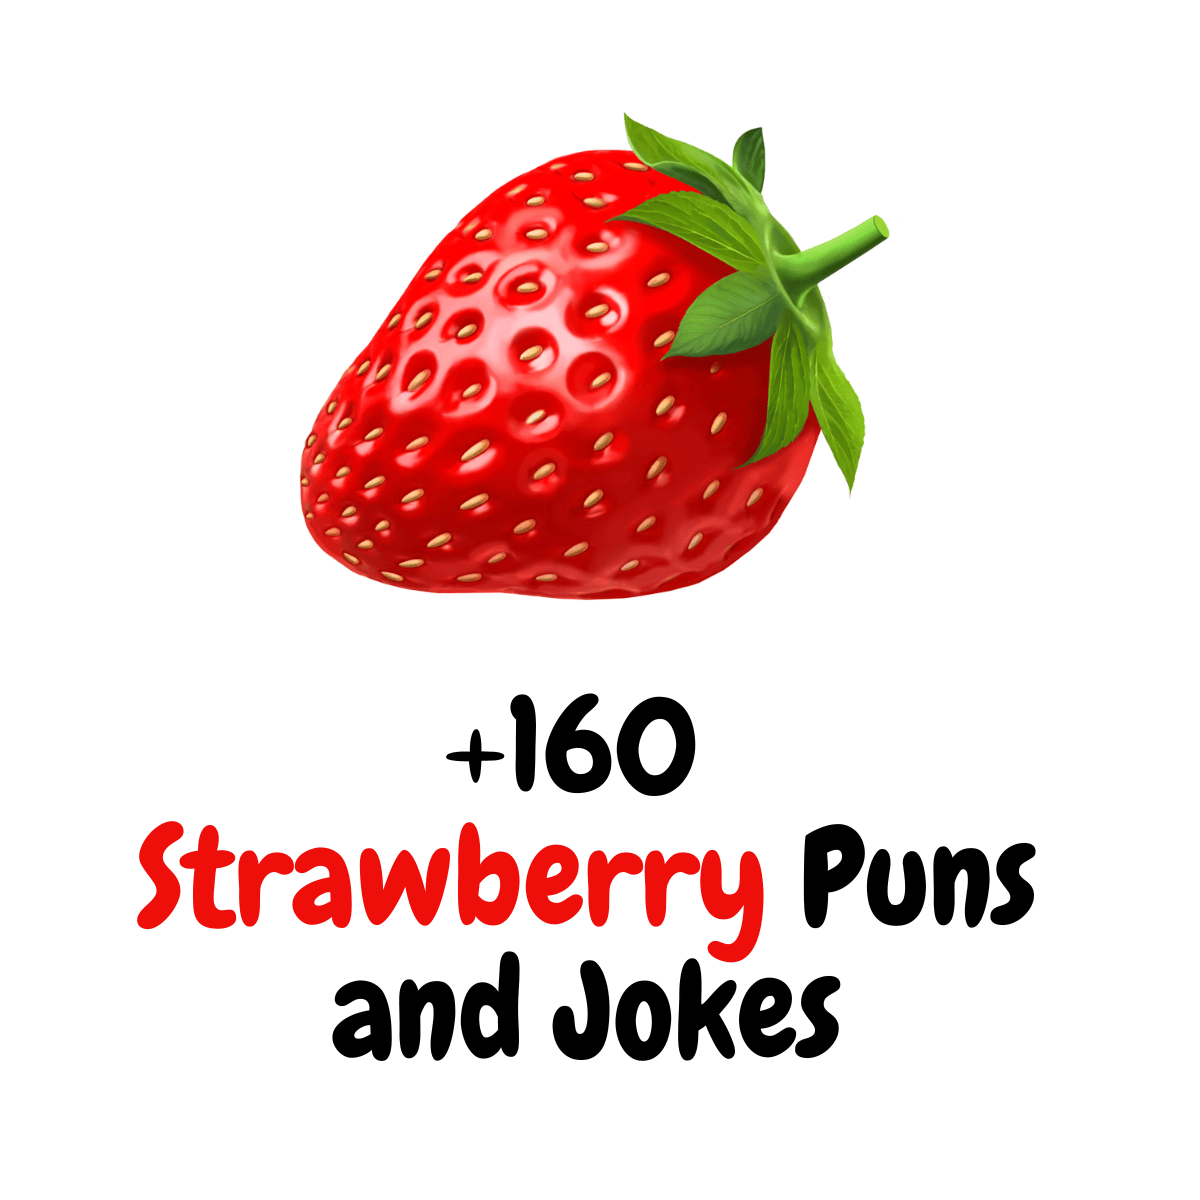 Strawberry Puns and Jokes to Brighten Your Day